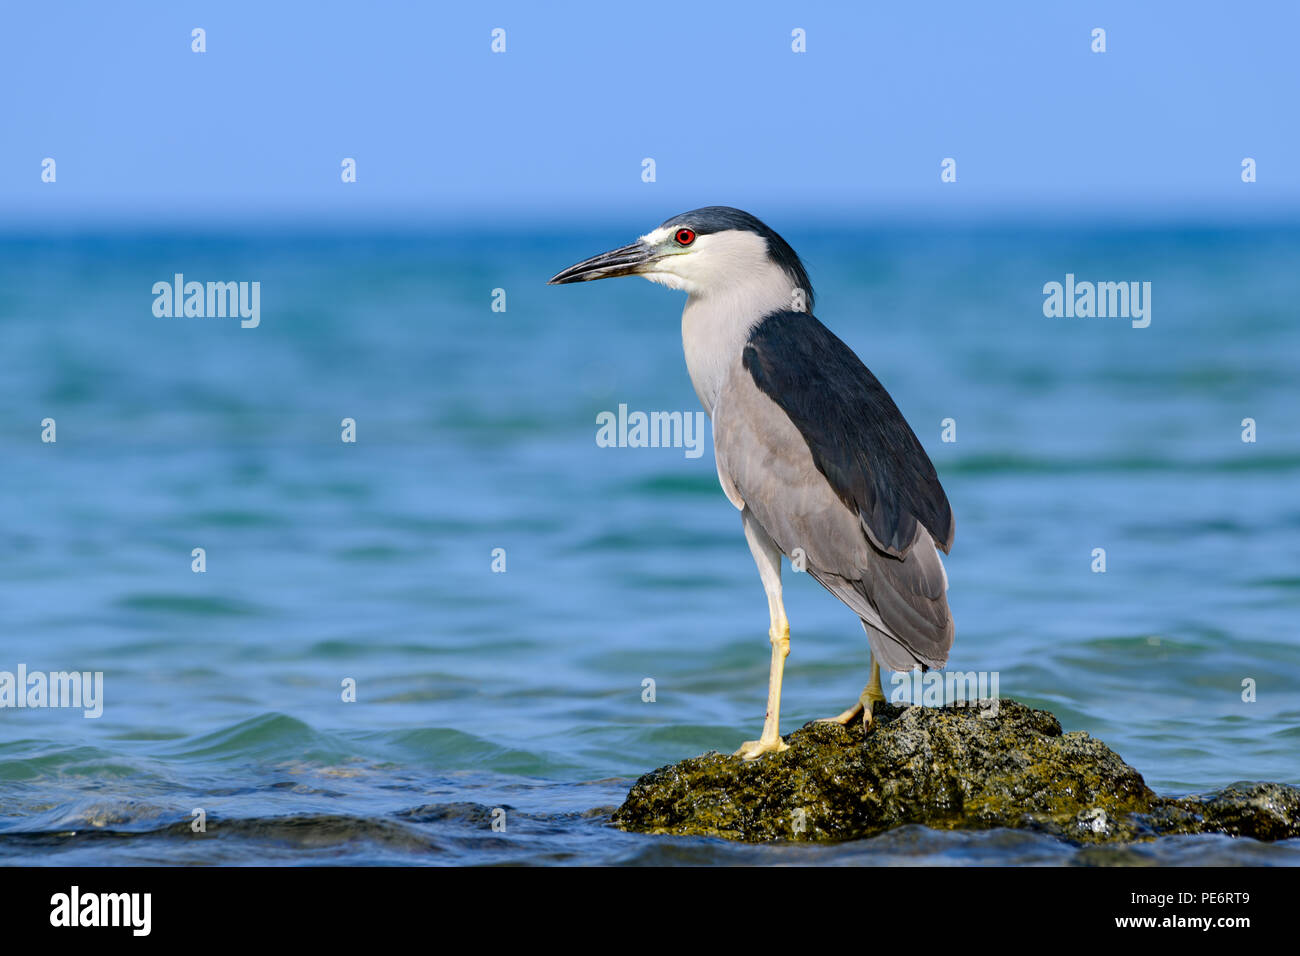 Hawaiian Black Crowned Night Heron (Nycticorax nycticoras) or Auku'u perched on a lava rock in the Pacific ocean off the coast of Hawaii Stock Photo